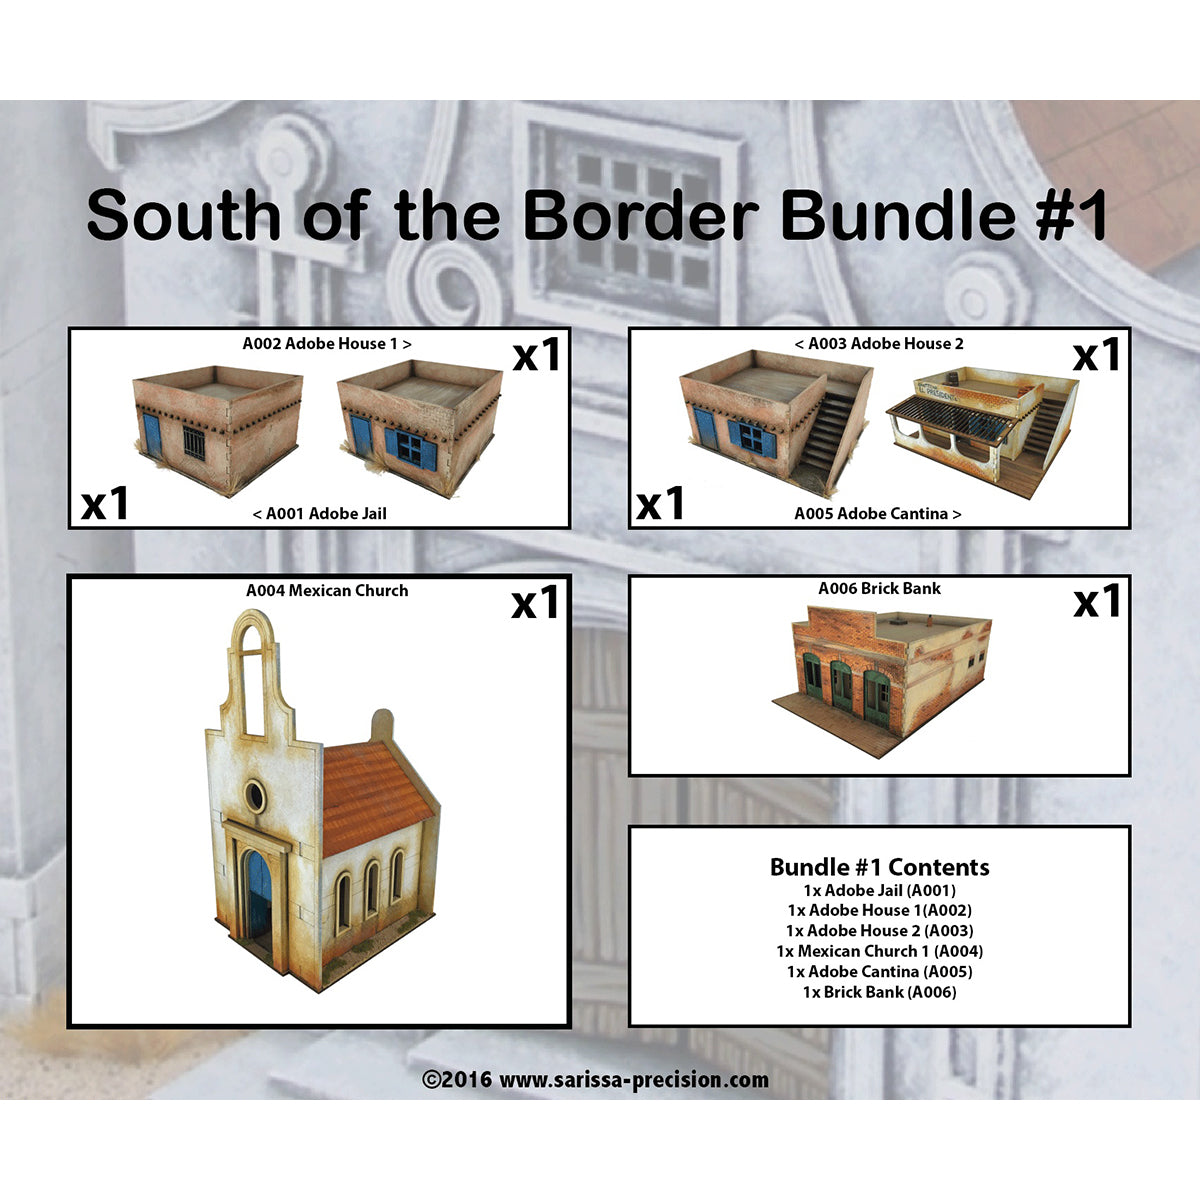 South of the Border Bundle #1